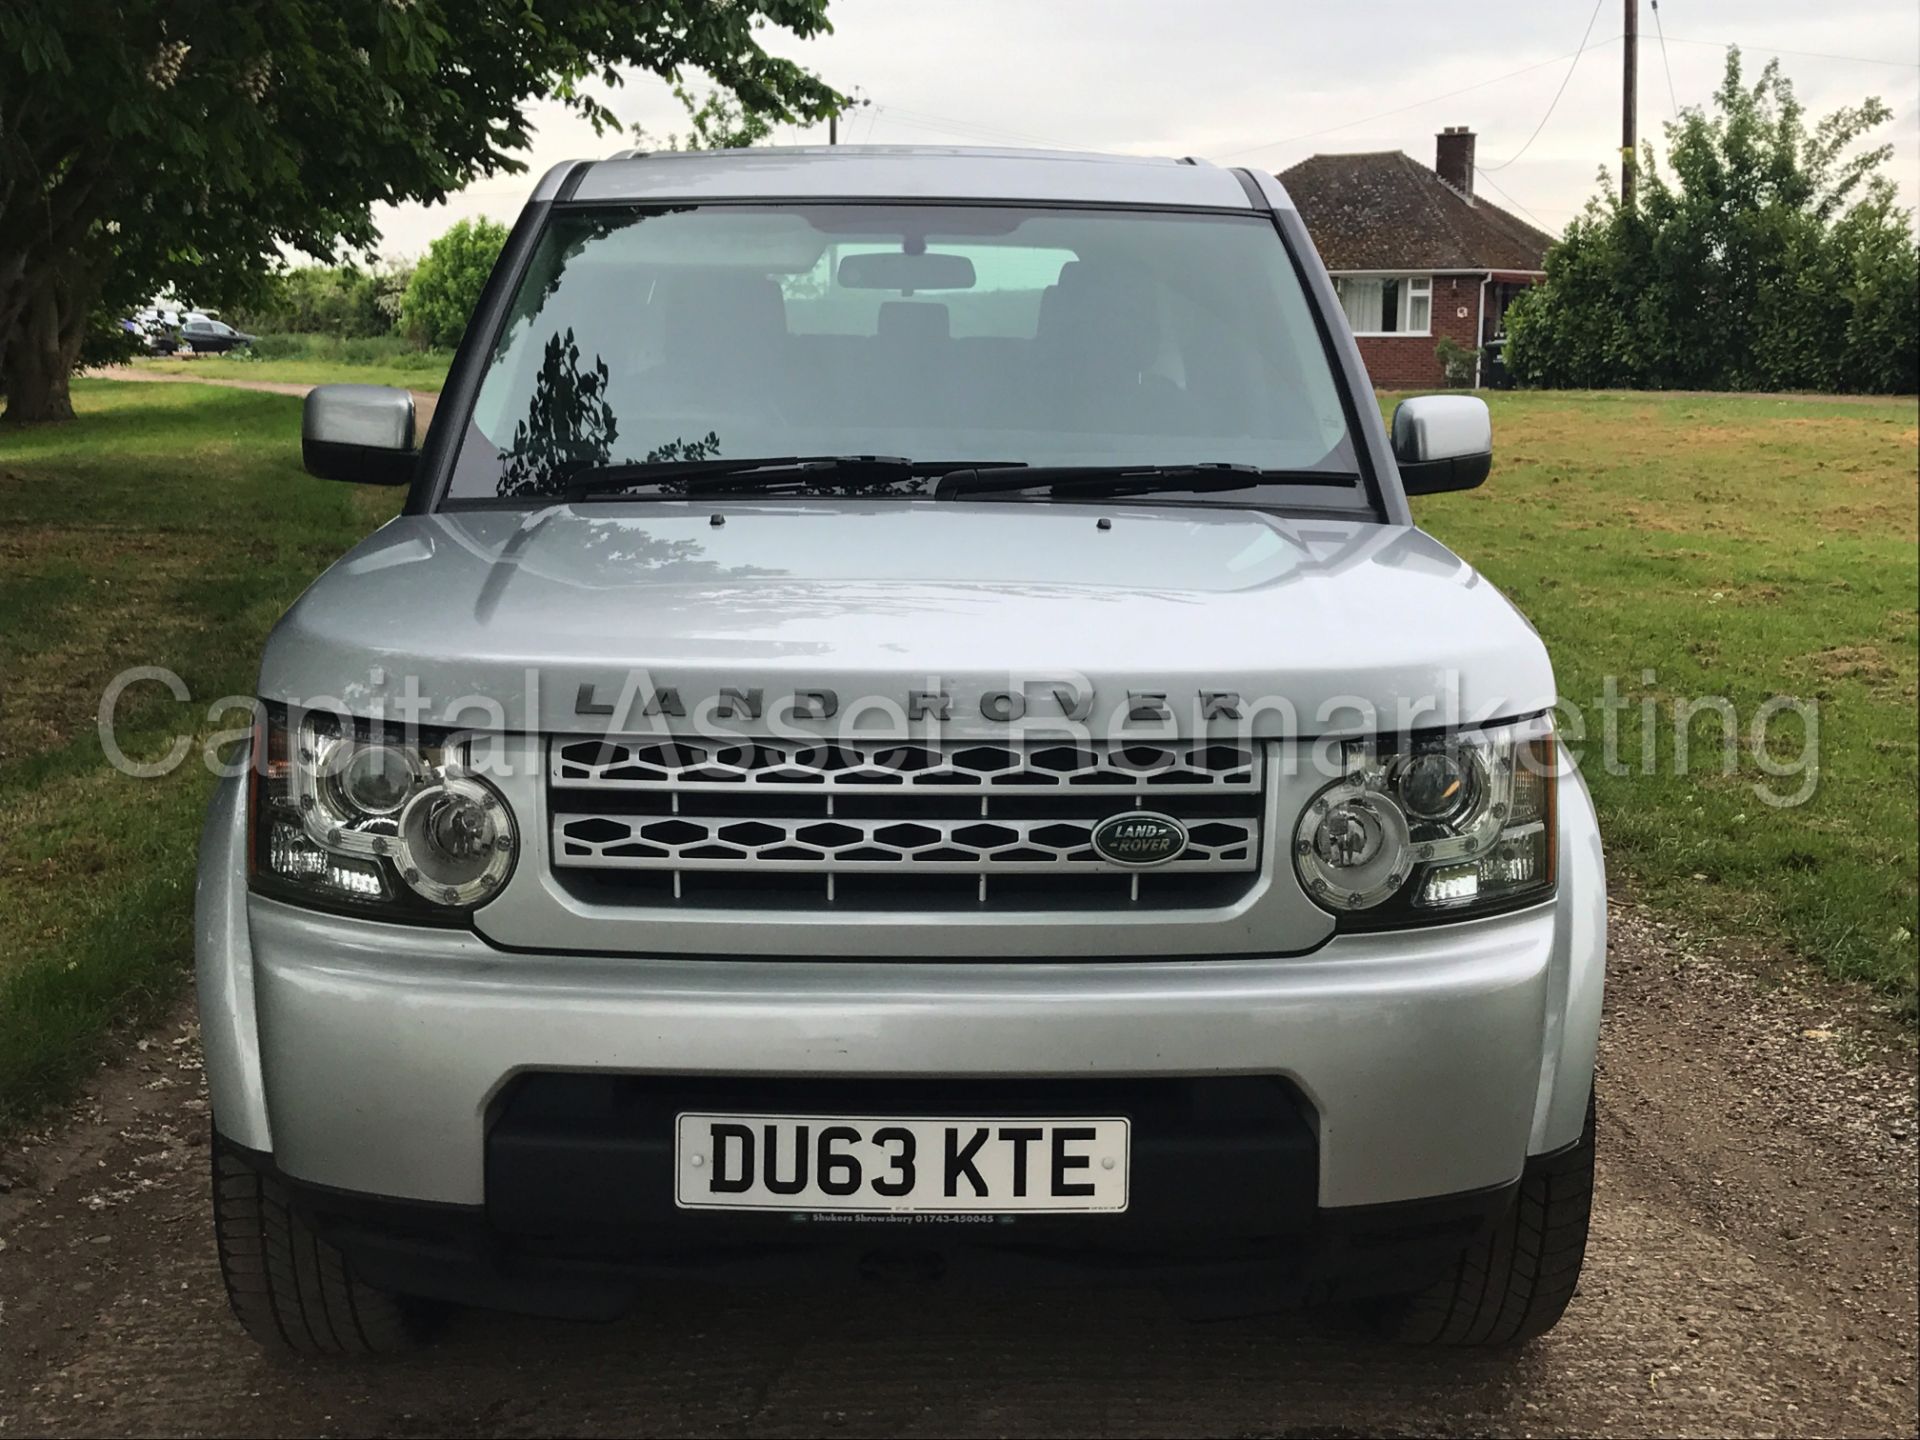 (On sale) LAND ROVER DISCOVERY 4 (2014 MODEL) '3.0 SDV6 -AUTO- 255 BHP - 7 SEATER'(1 OWNER FROM NEW) - Image 10 of 42